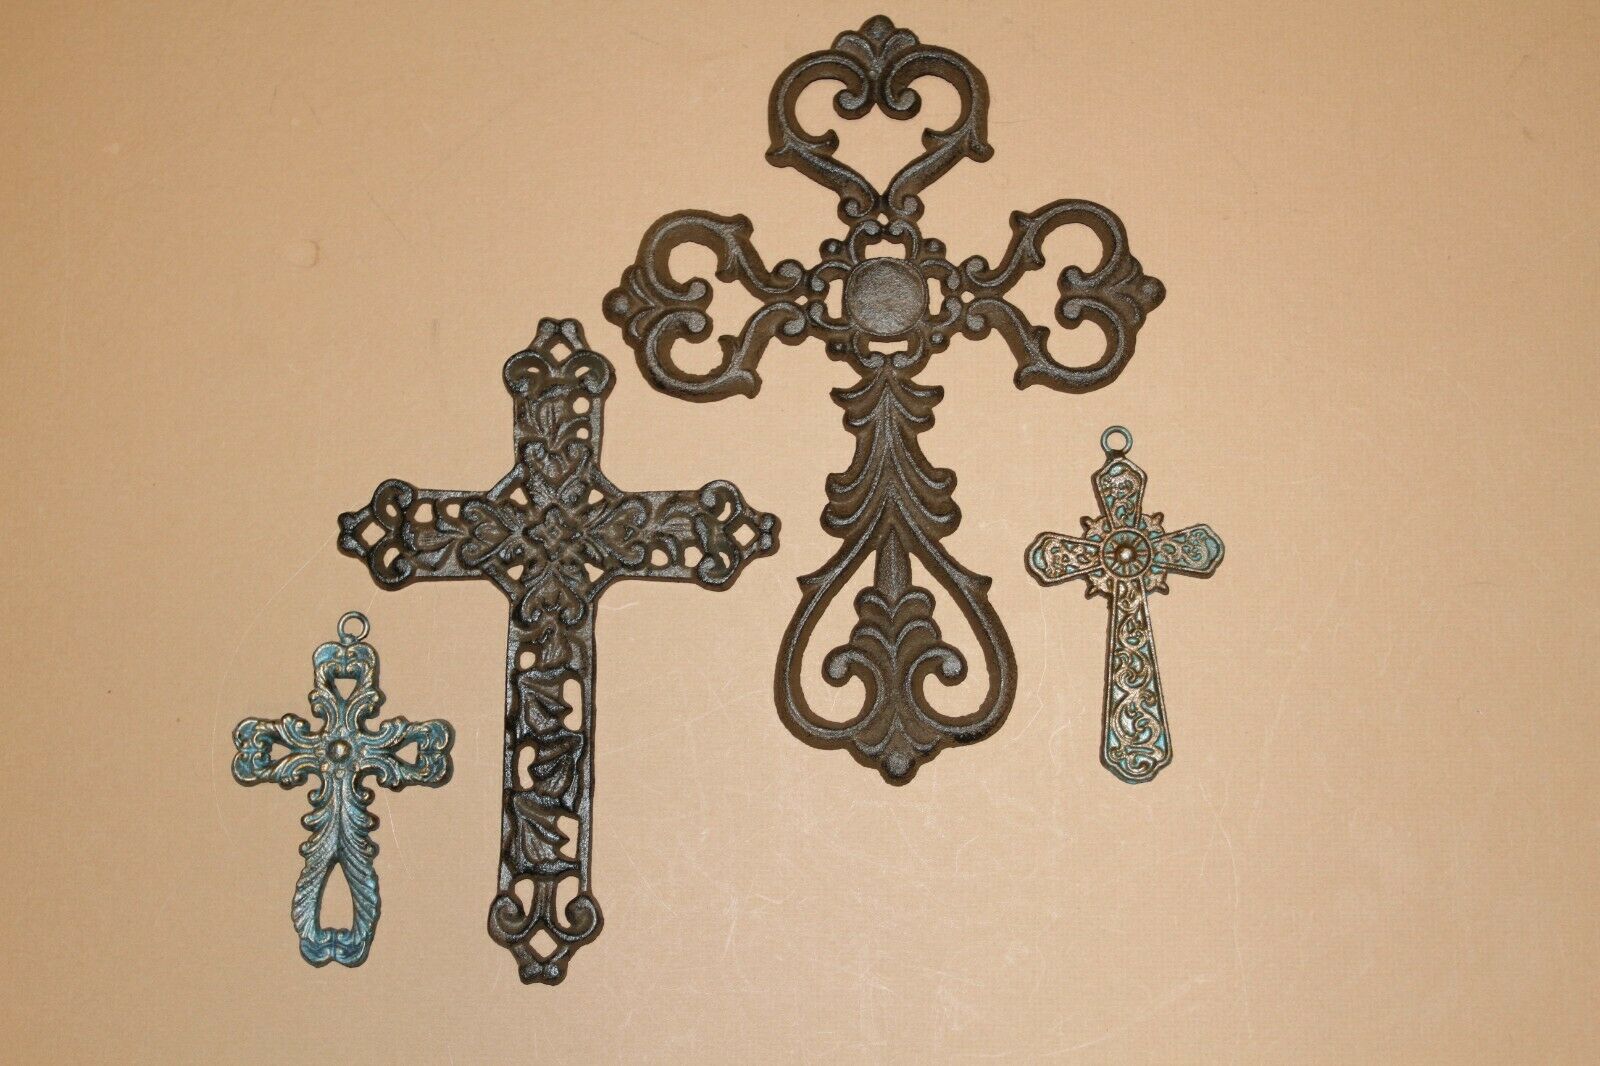 Rustic Christian Home Decor Wall Crosses Collection, Cast Iron Corpus Christy 4